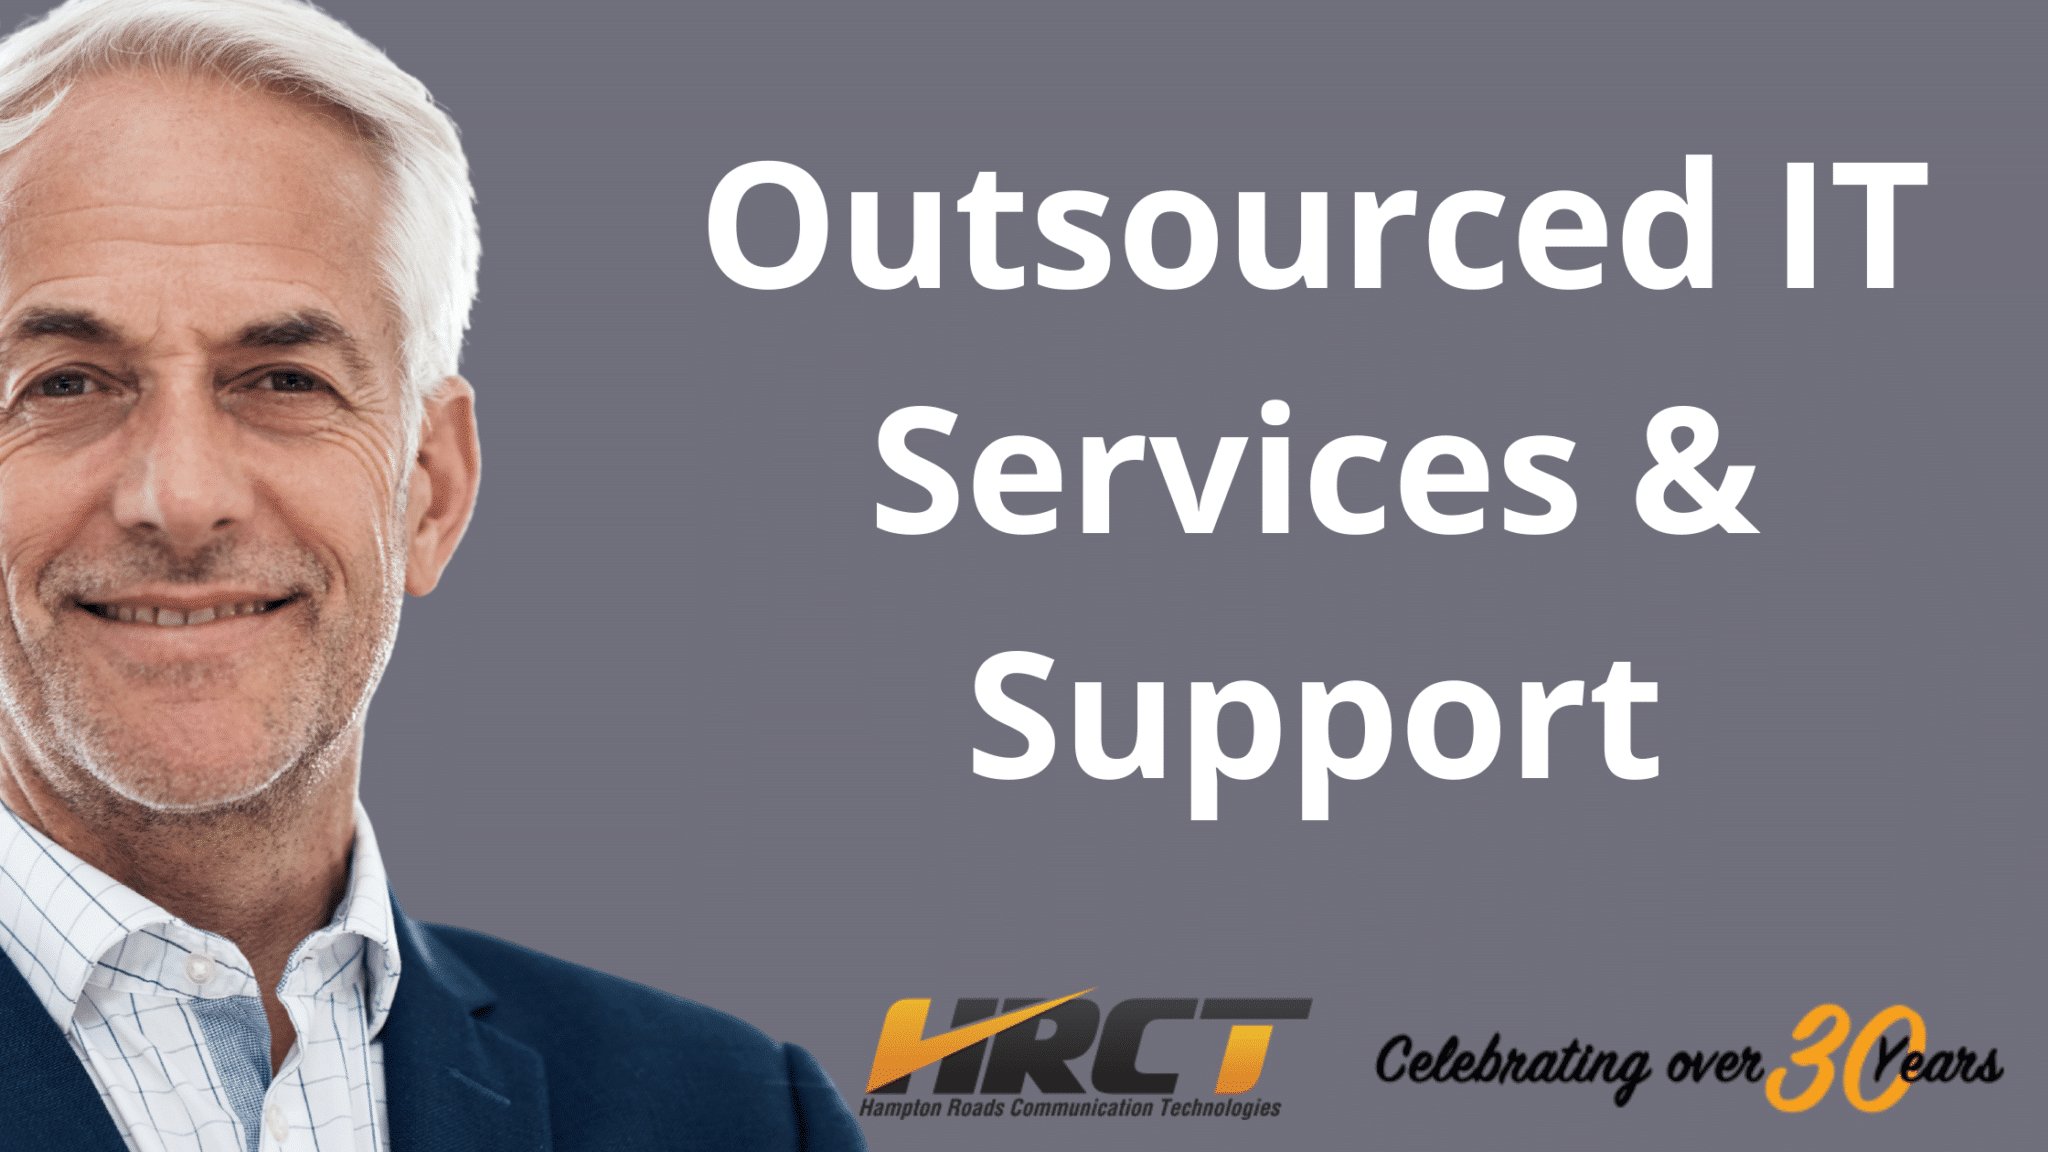 Outsourced IT Services & Support